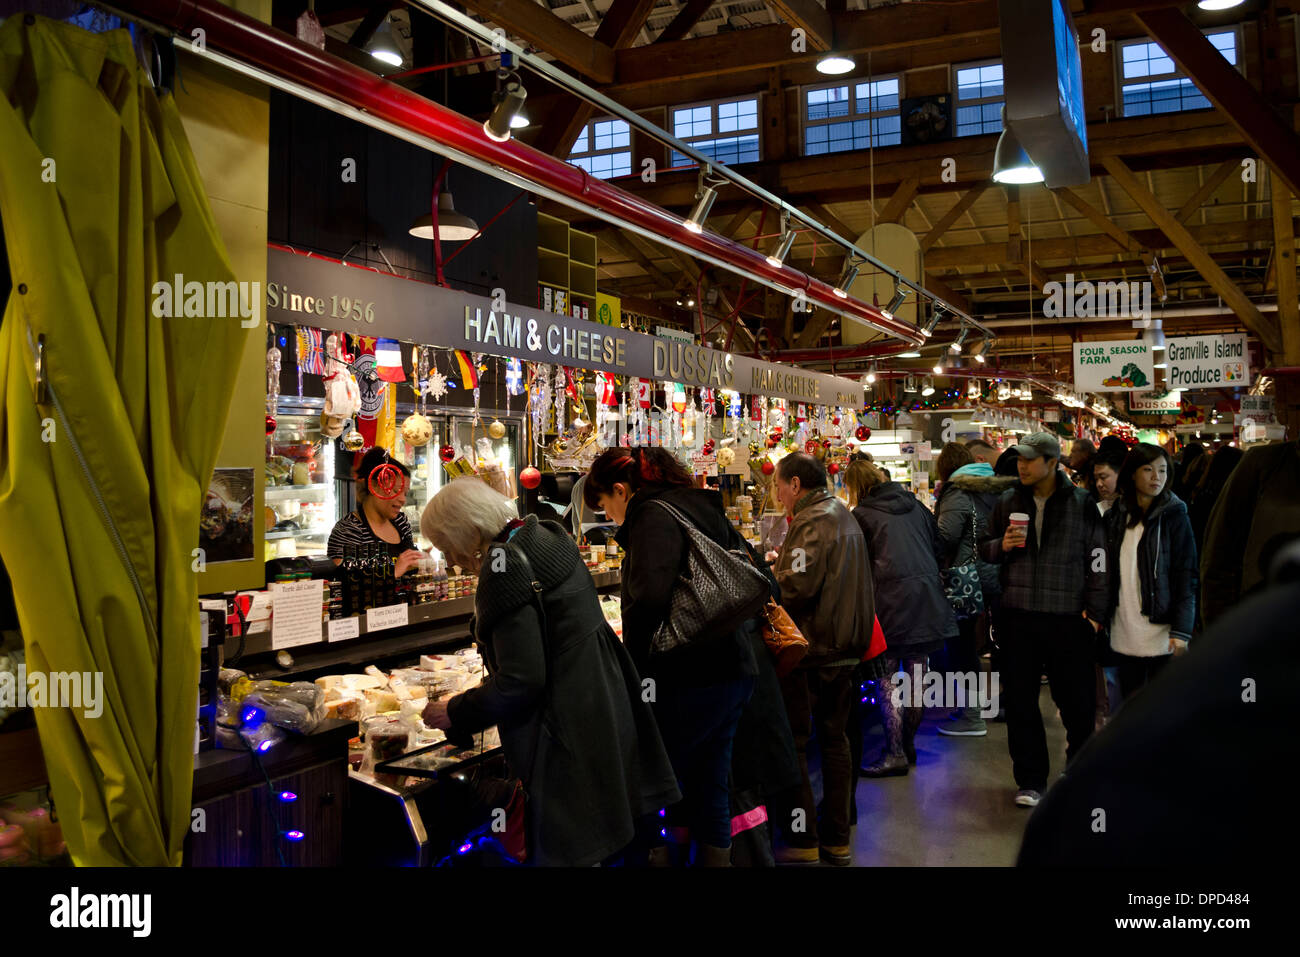 Busy holiday shoppers during the Christmas season at Granville Island Public Market in Vancouver. Dussa's Italian gourmet foods Stock Photo